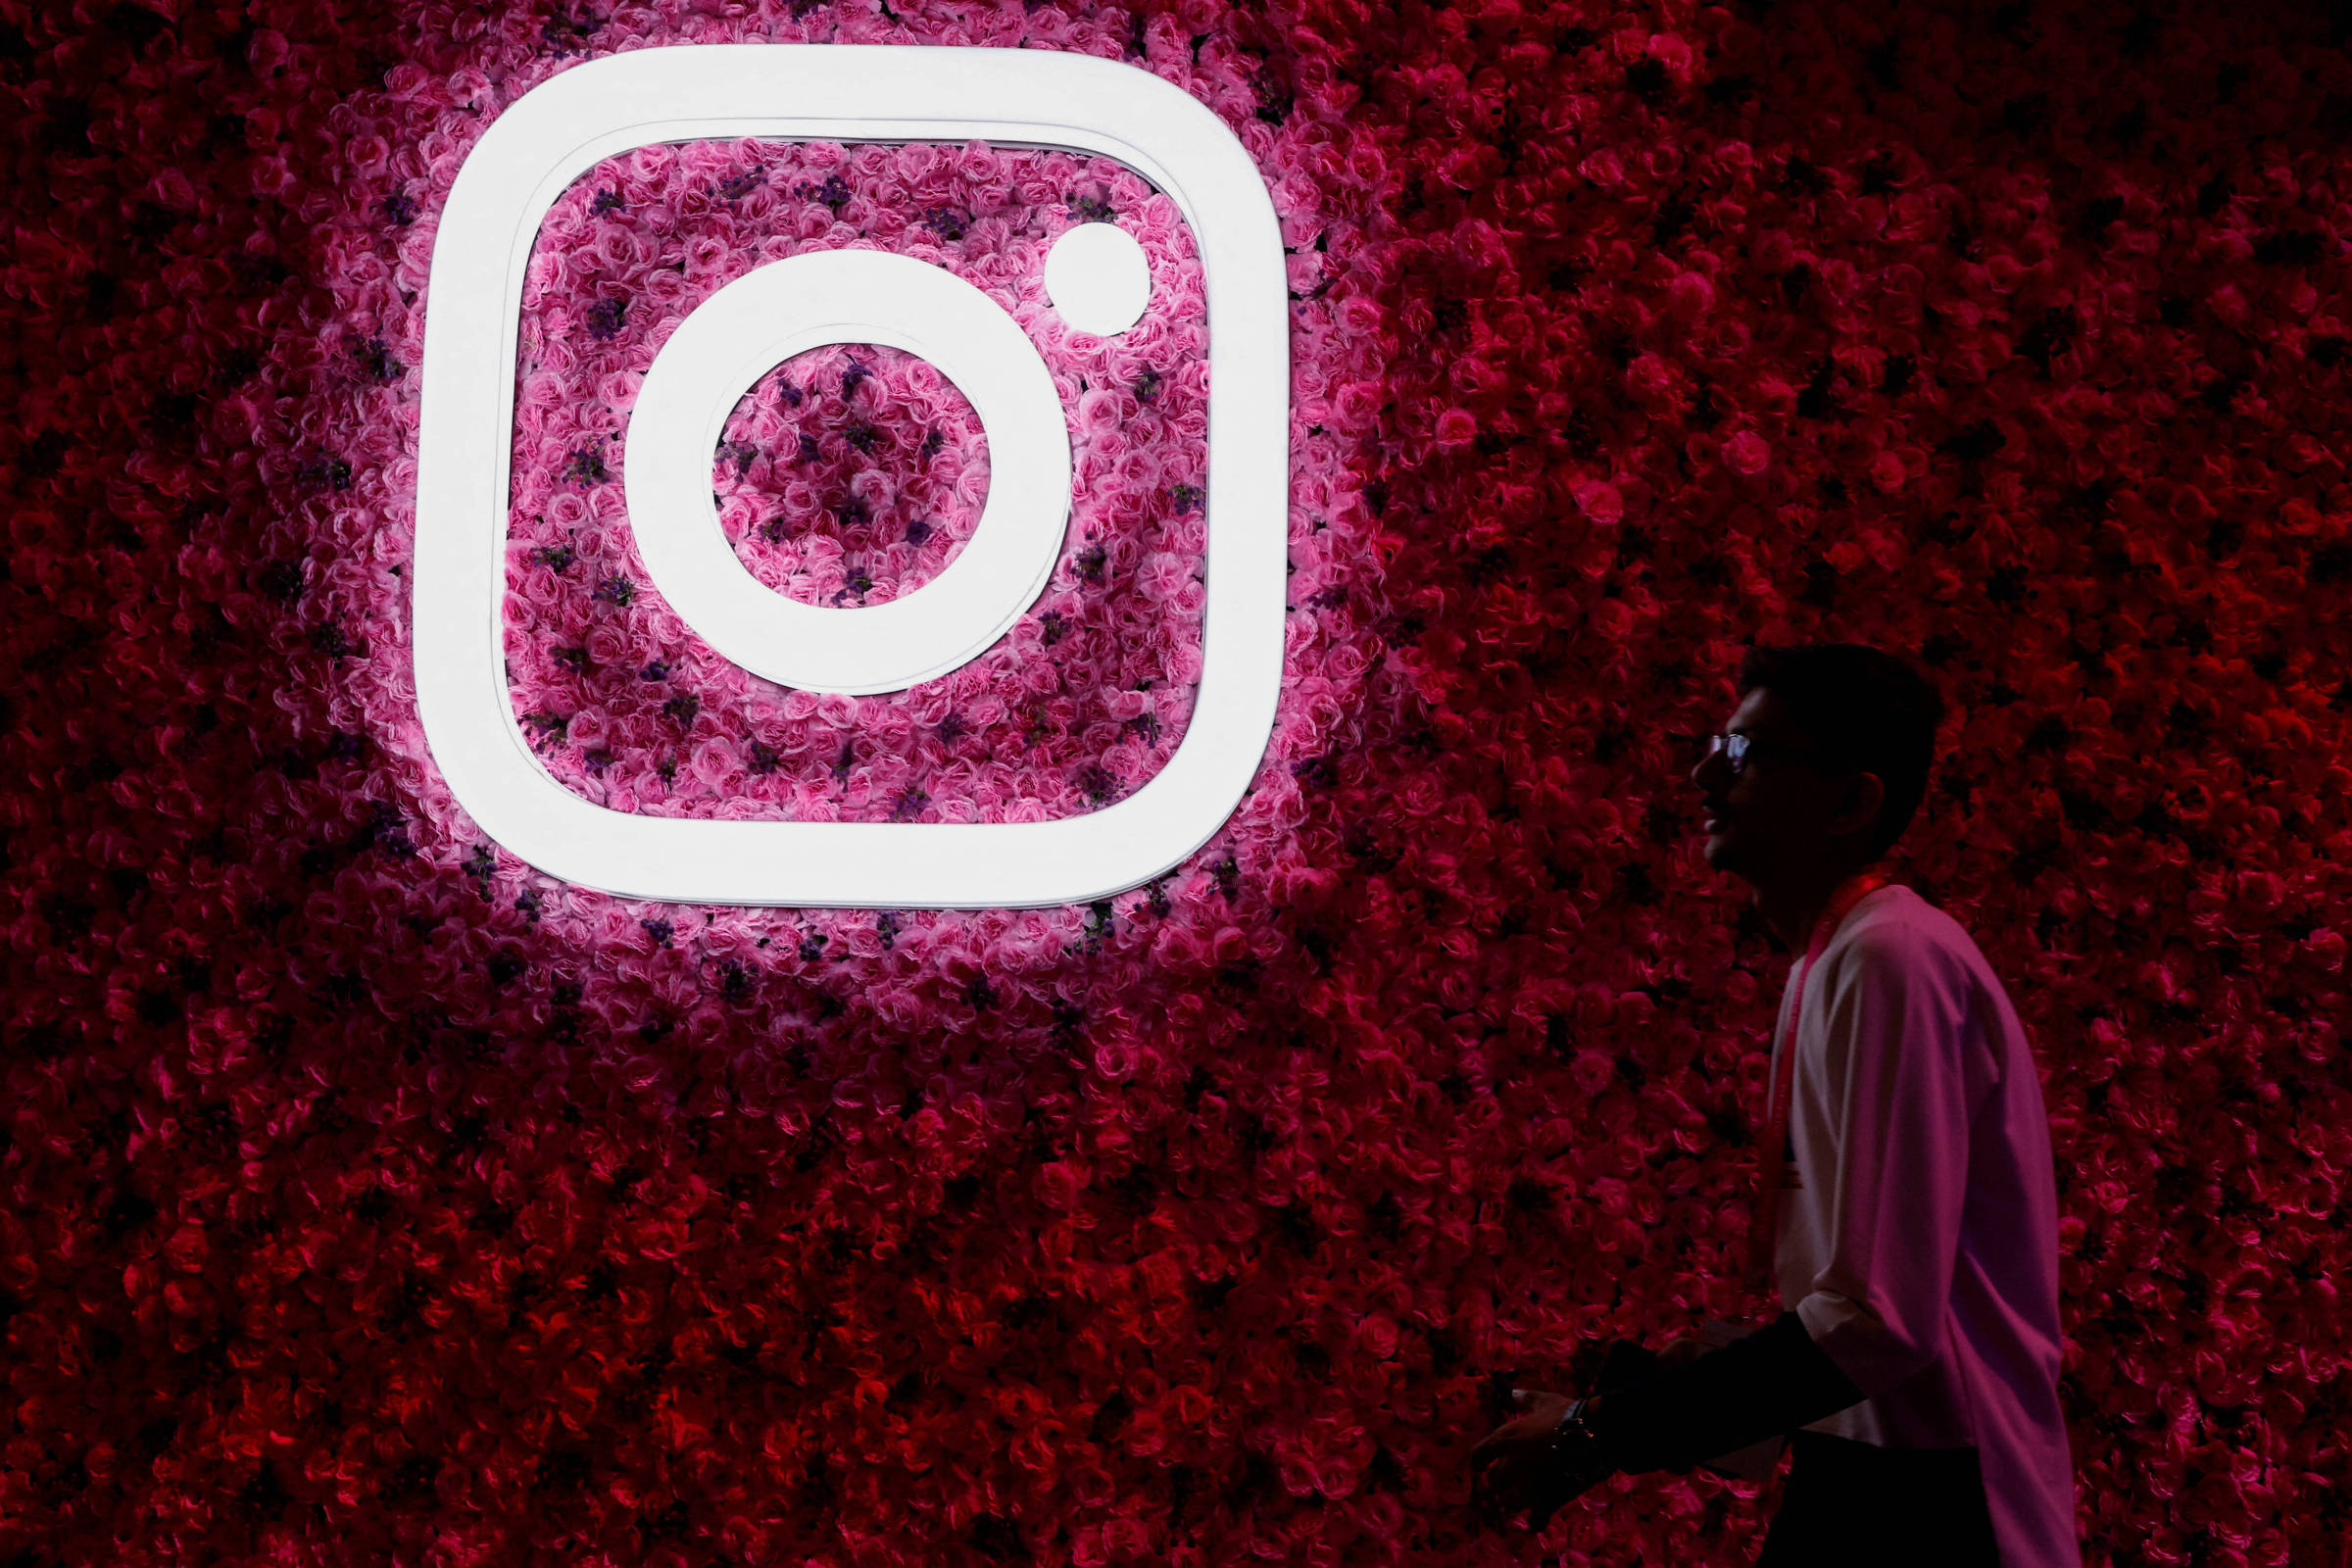 Users report instability on Instagram this Thursday